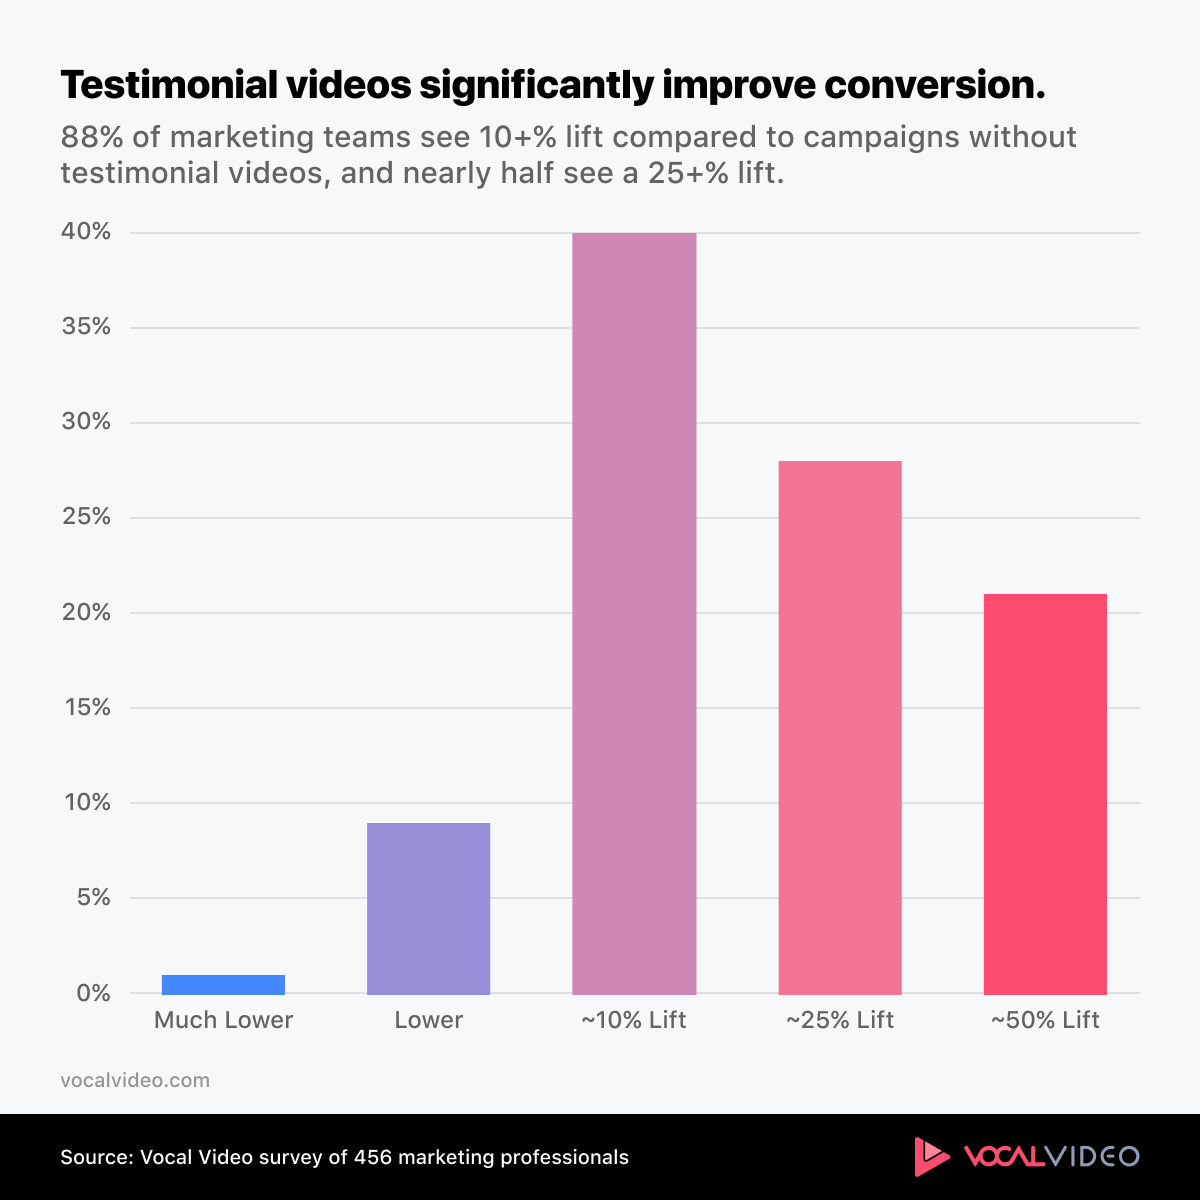 Testimonials significantly increase conversion rates. 